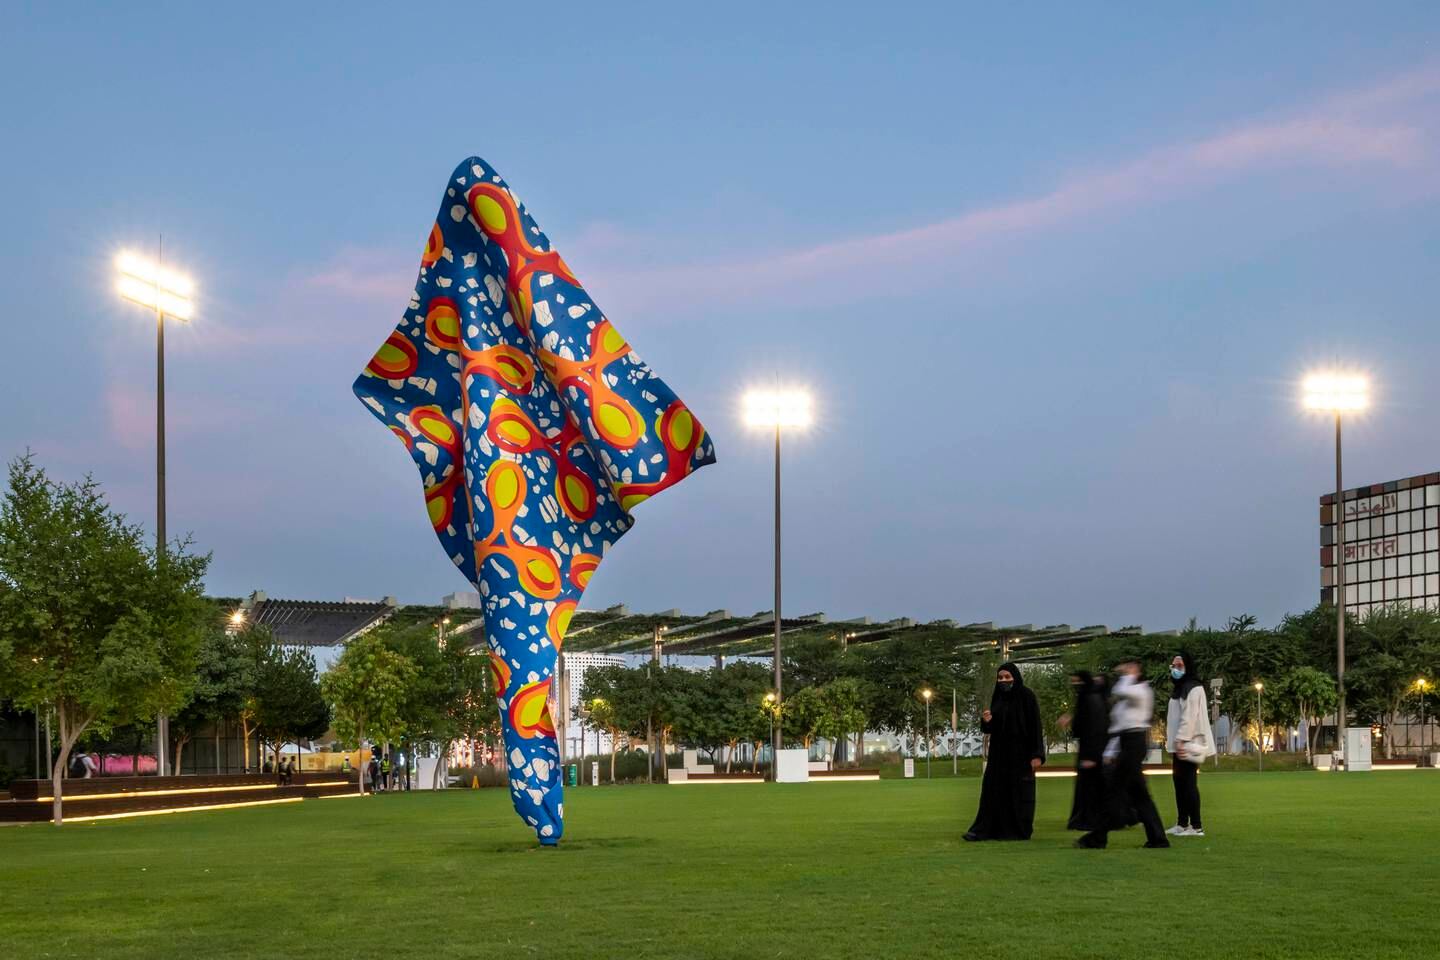 Inspired by Dutch East India Fabric, one of Yinka Shonibare's Wind Sculptures was part of the Public Art Programme for Expo 2020 Dubai and remains a permanent artwork in the new district. Photo: Thorsten Arendt / Expo 2020 Dubai